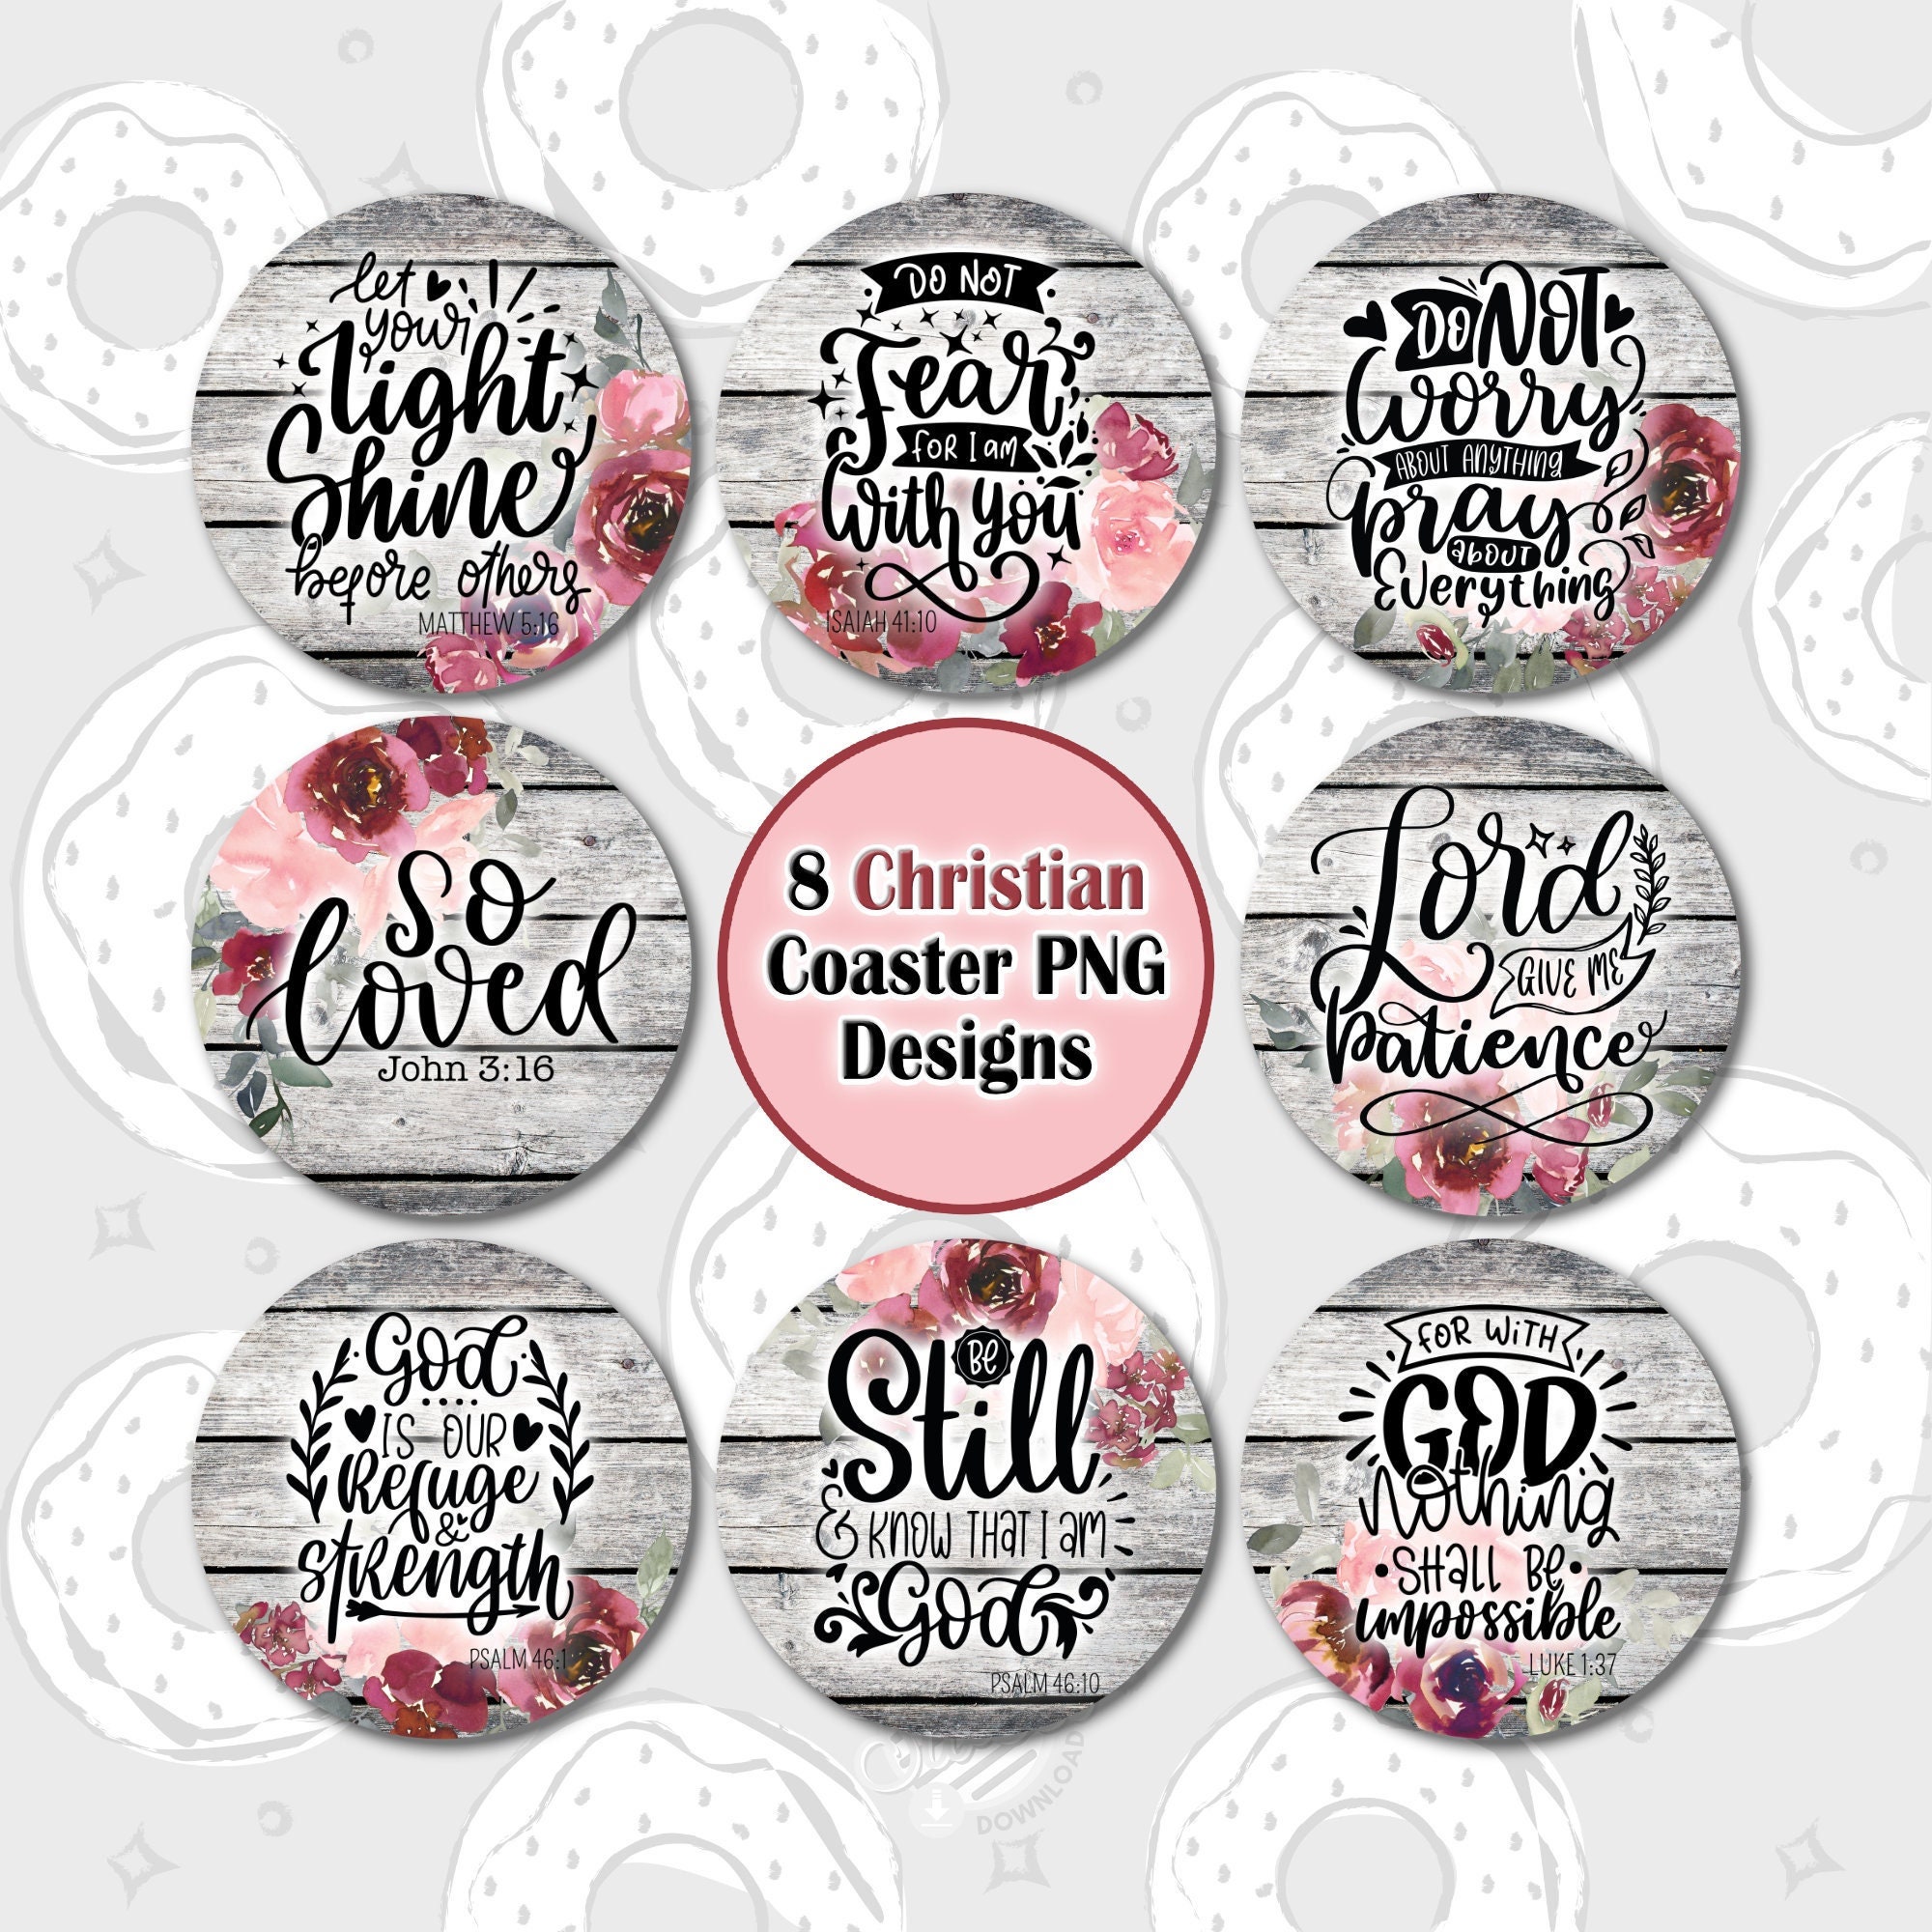 SB- Sublimation Blank Car Coasters, 2.75 in Circular Opening – Jersey Girl  Sublimation Transfers & Blanks